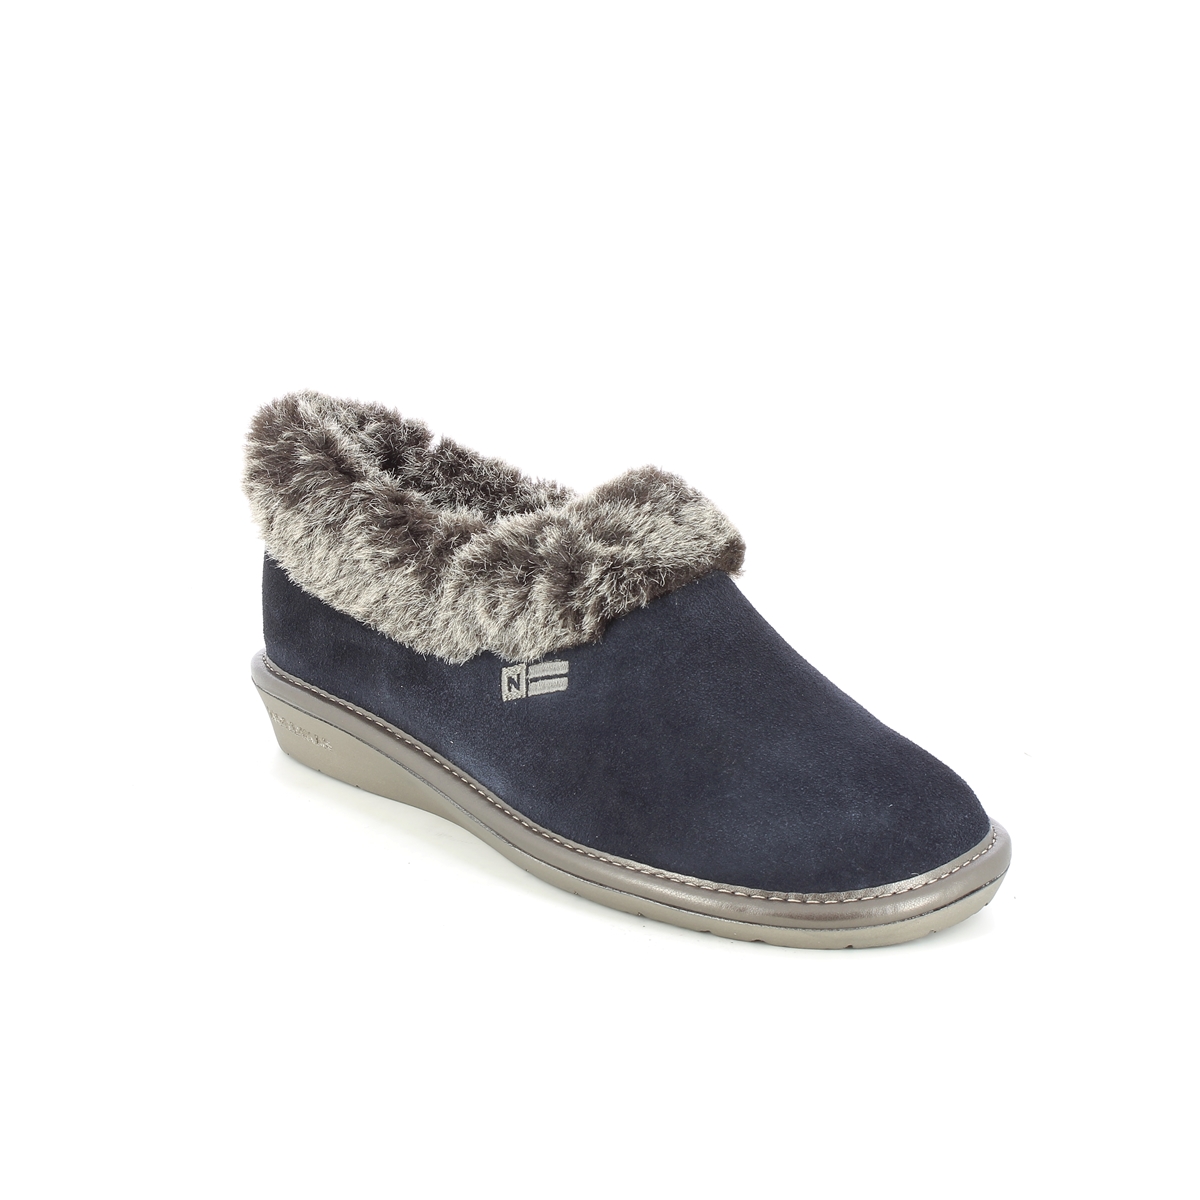 Nordikas Toasty Fur Navy Suede Womens Slippers 1358-4O In Size 37 In Plain Navy Suede